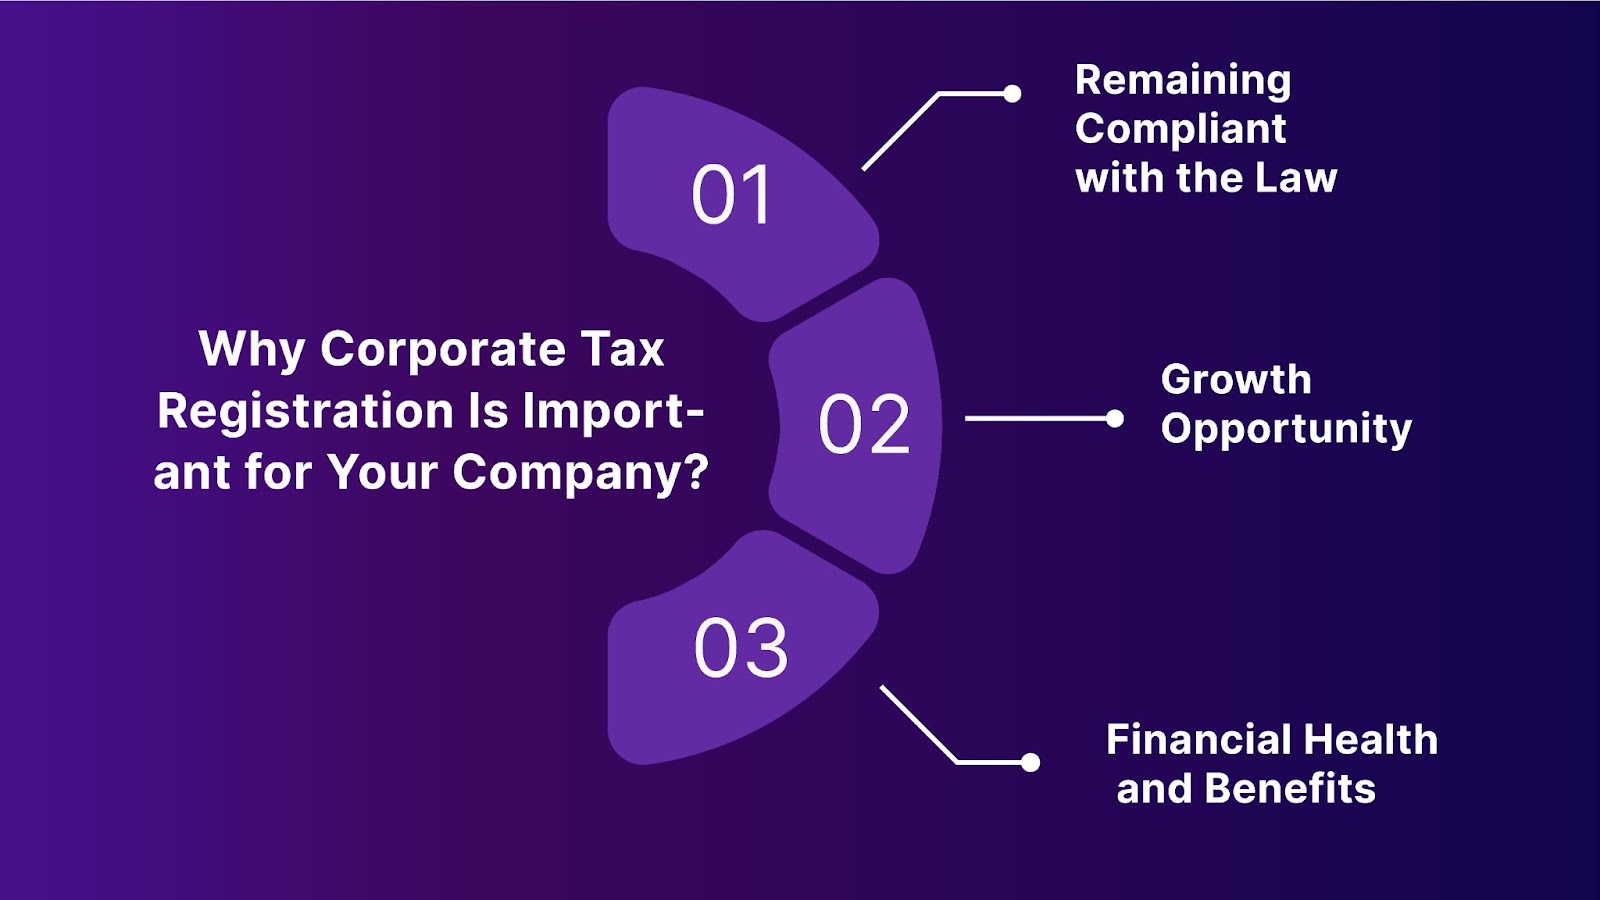 Why Corporate Tax Registration Is Important for Your Company?